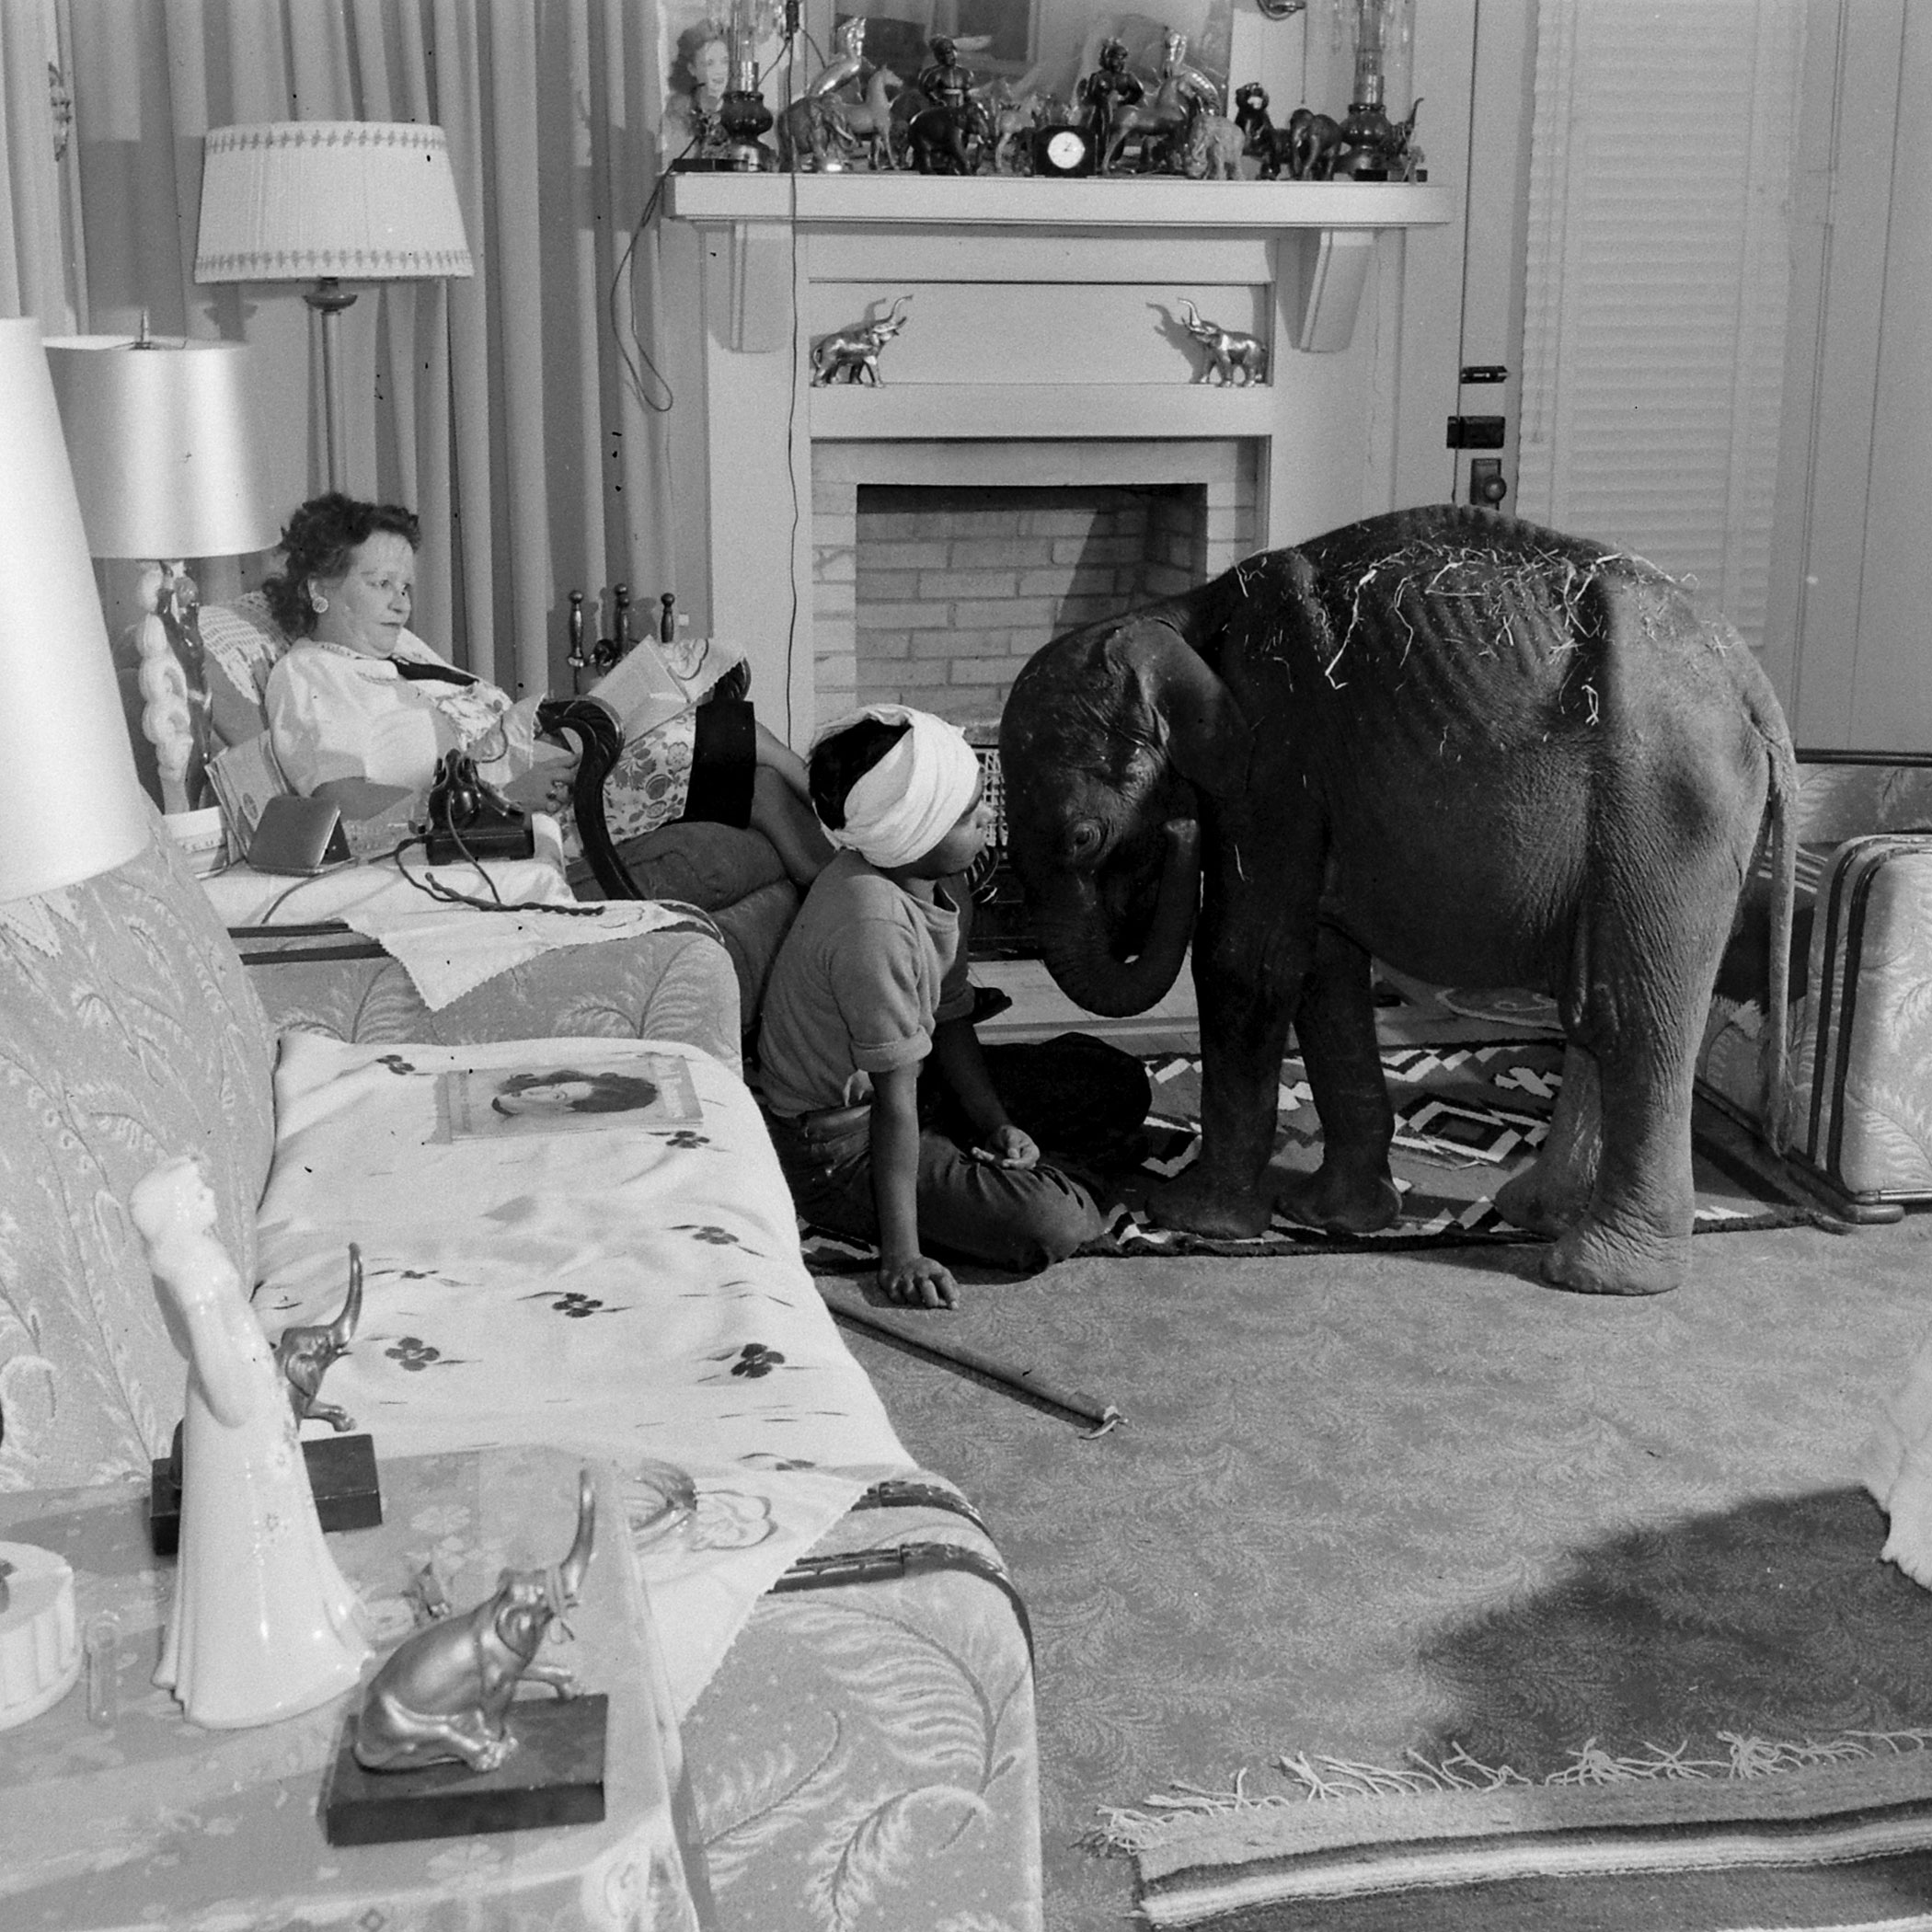 "Butch" the baby elephant with her keeper Singh in the Davenport living room.